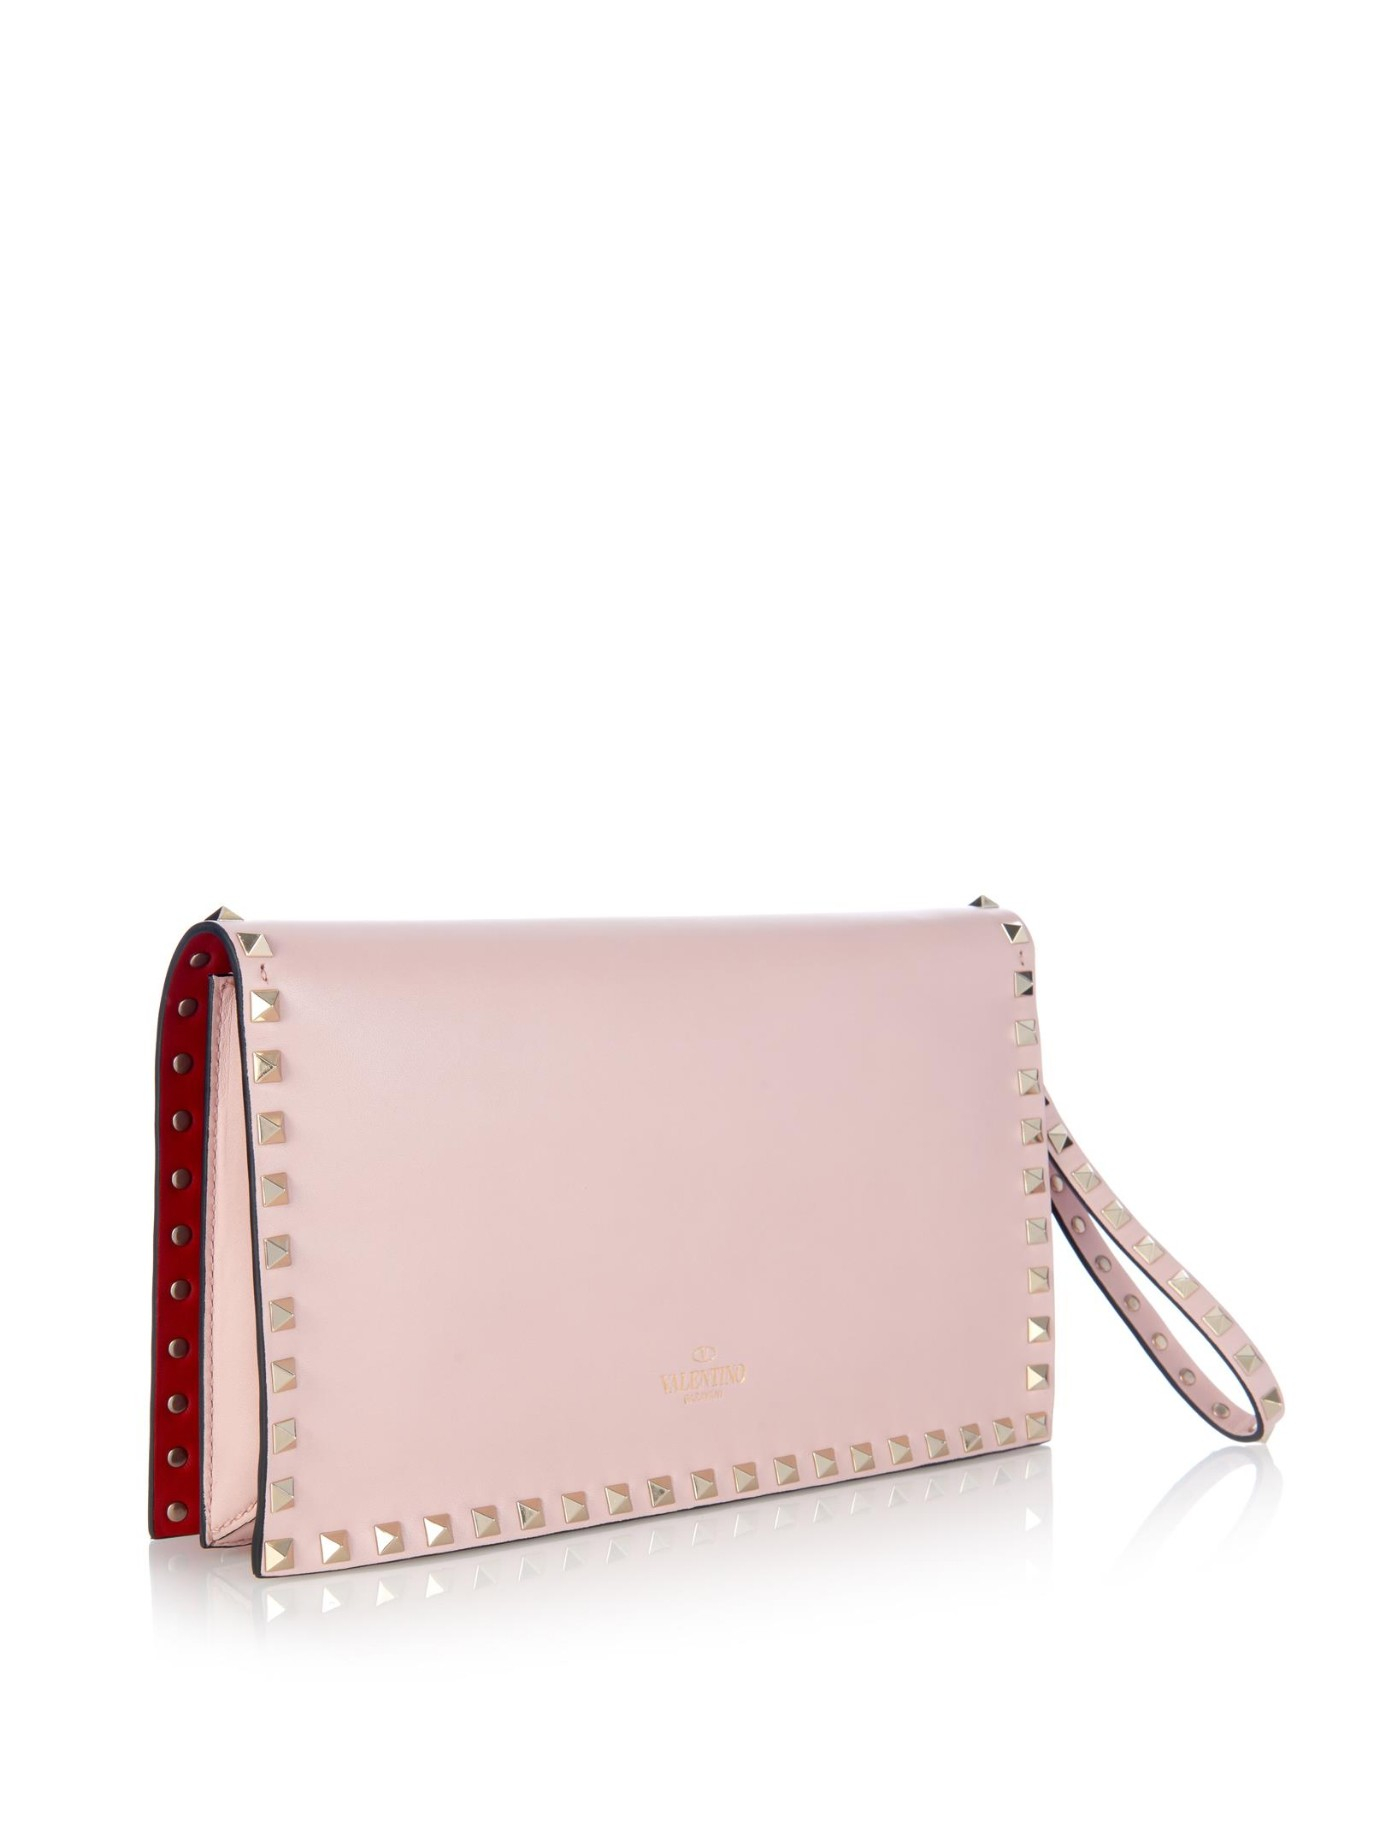 Valentino Rockstud Leather Clutch in Light Pink (Pink) - Lyst